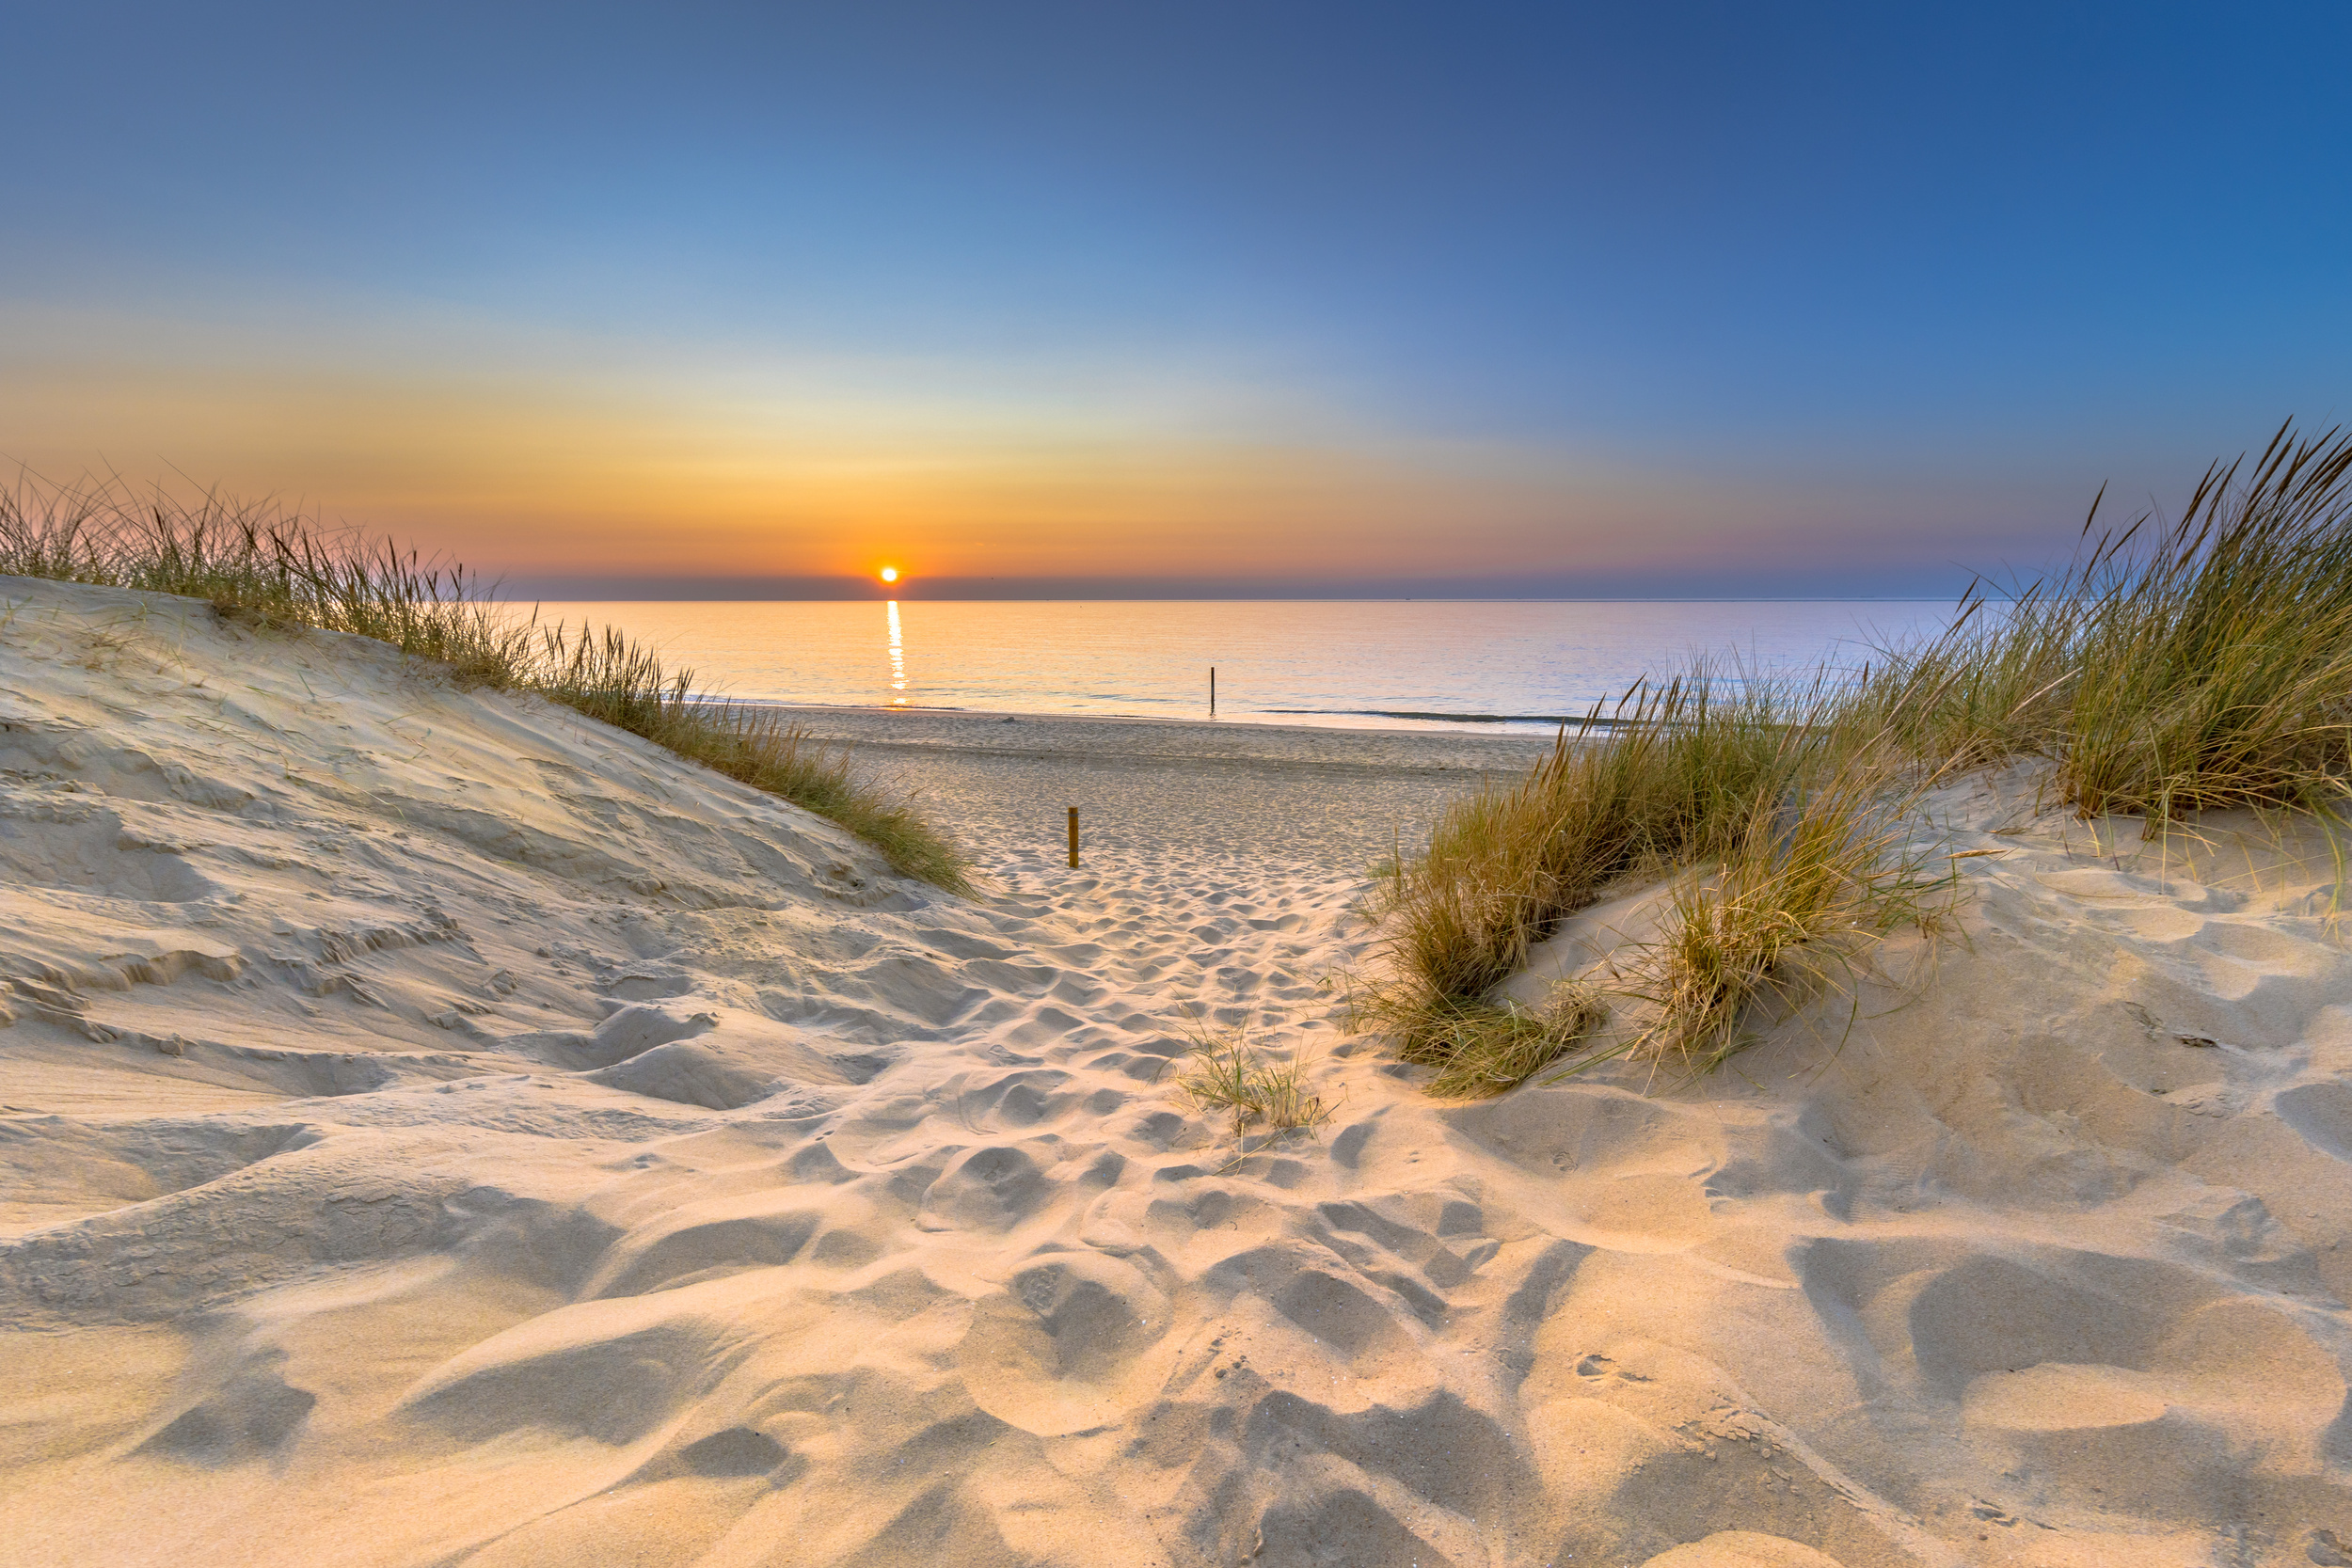 <p>The Netherlands isn’t exactly the first place that comes to mind when most imagine a coastal escape. However, the Zeeland province in the south of the country is home to countless adorable beach towns where stretches of golden sand stretch for miles. Favorites include Domburg, Westkapelle, and Zoutelande.</p><p>You may also like: <a href='https://www.yardbarker.com/lifestyle/articles/be_prepared_with_these_must_have_items_for_your_familys_emergency_kit_030624/s1__36463991'>Be prepared with these must-have items for your family's emergency kit</a></p>